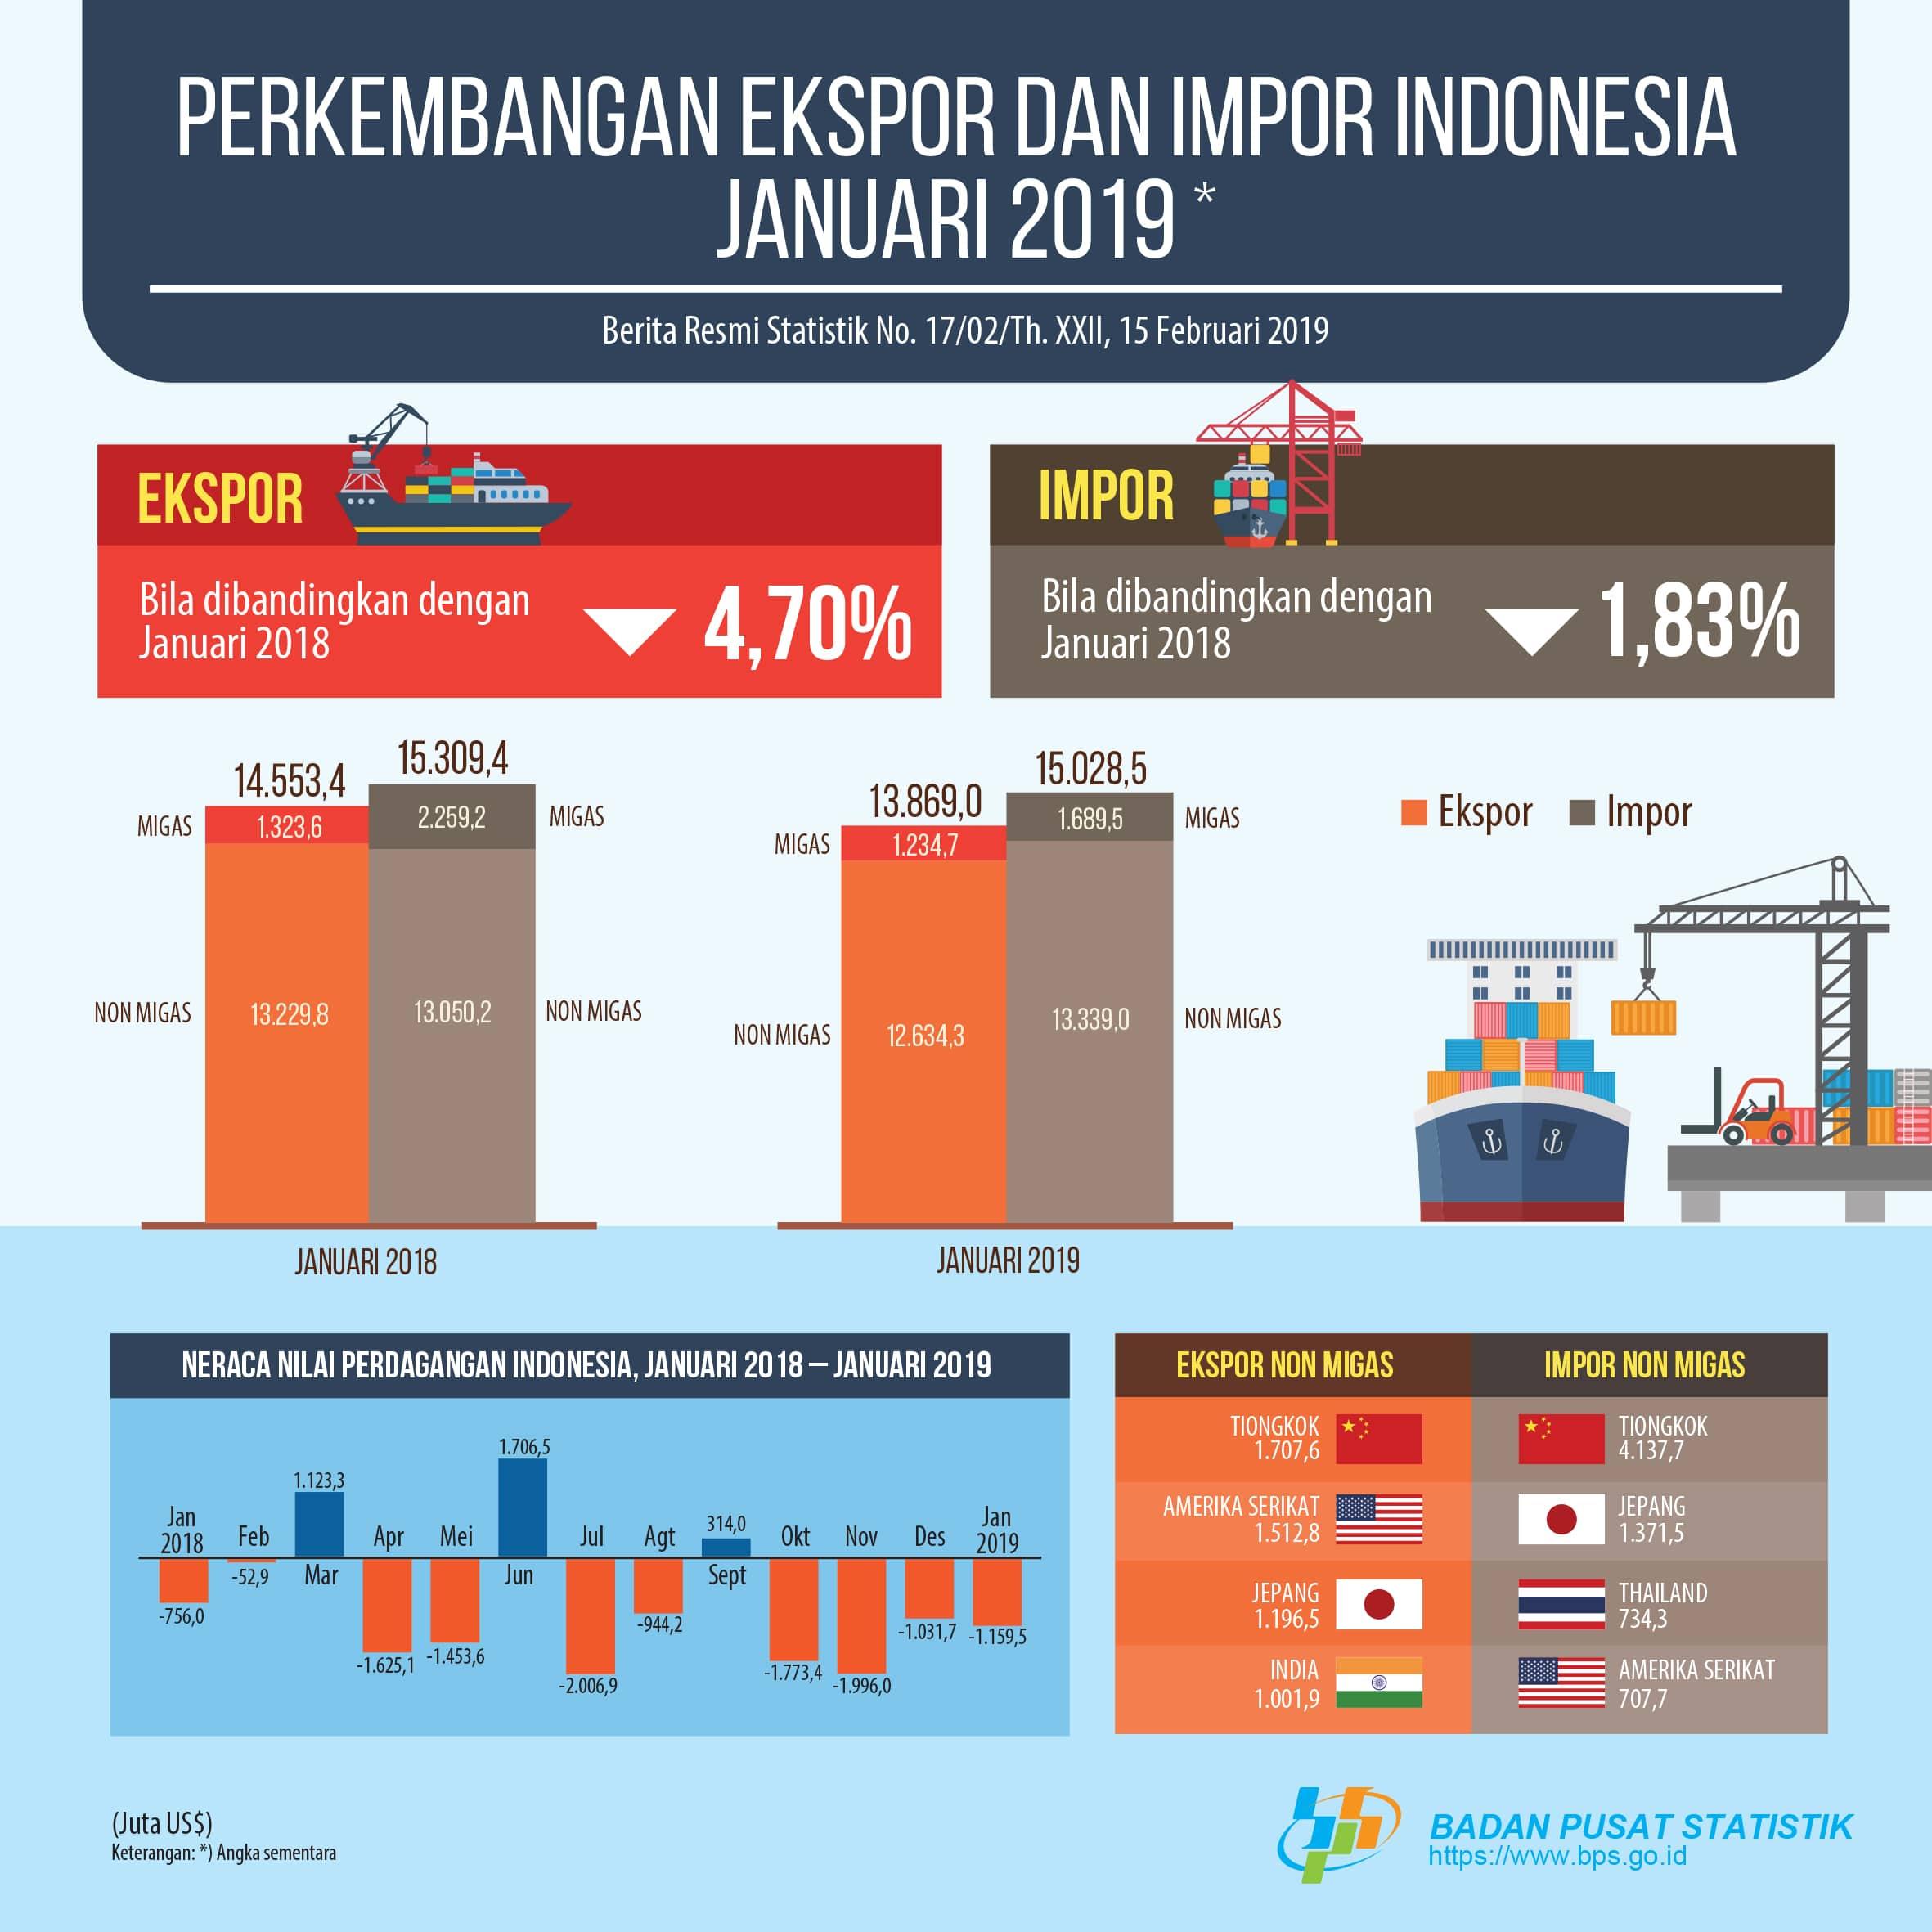 Exports in January 2019 amounted to US $ 13.87 billion, imports in January 2019 were US $ 15.03 billion